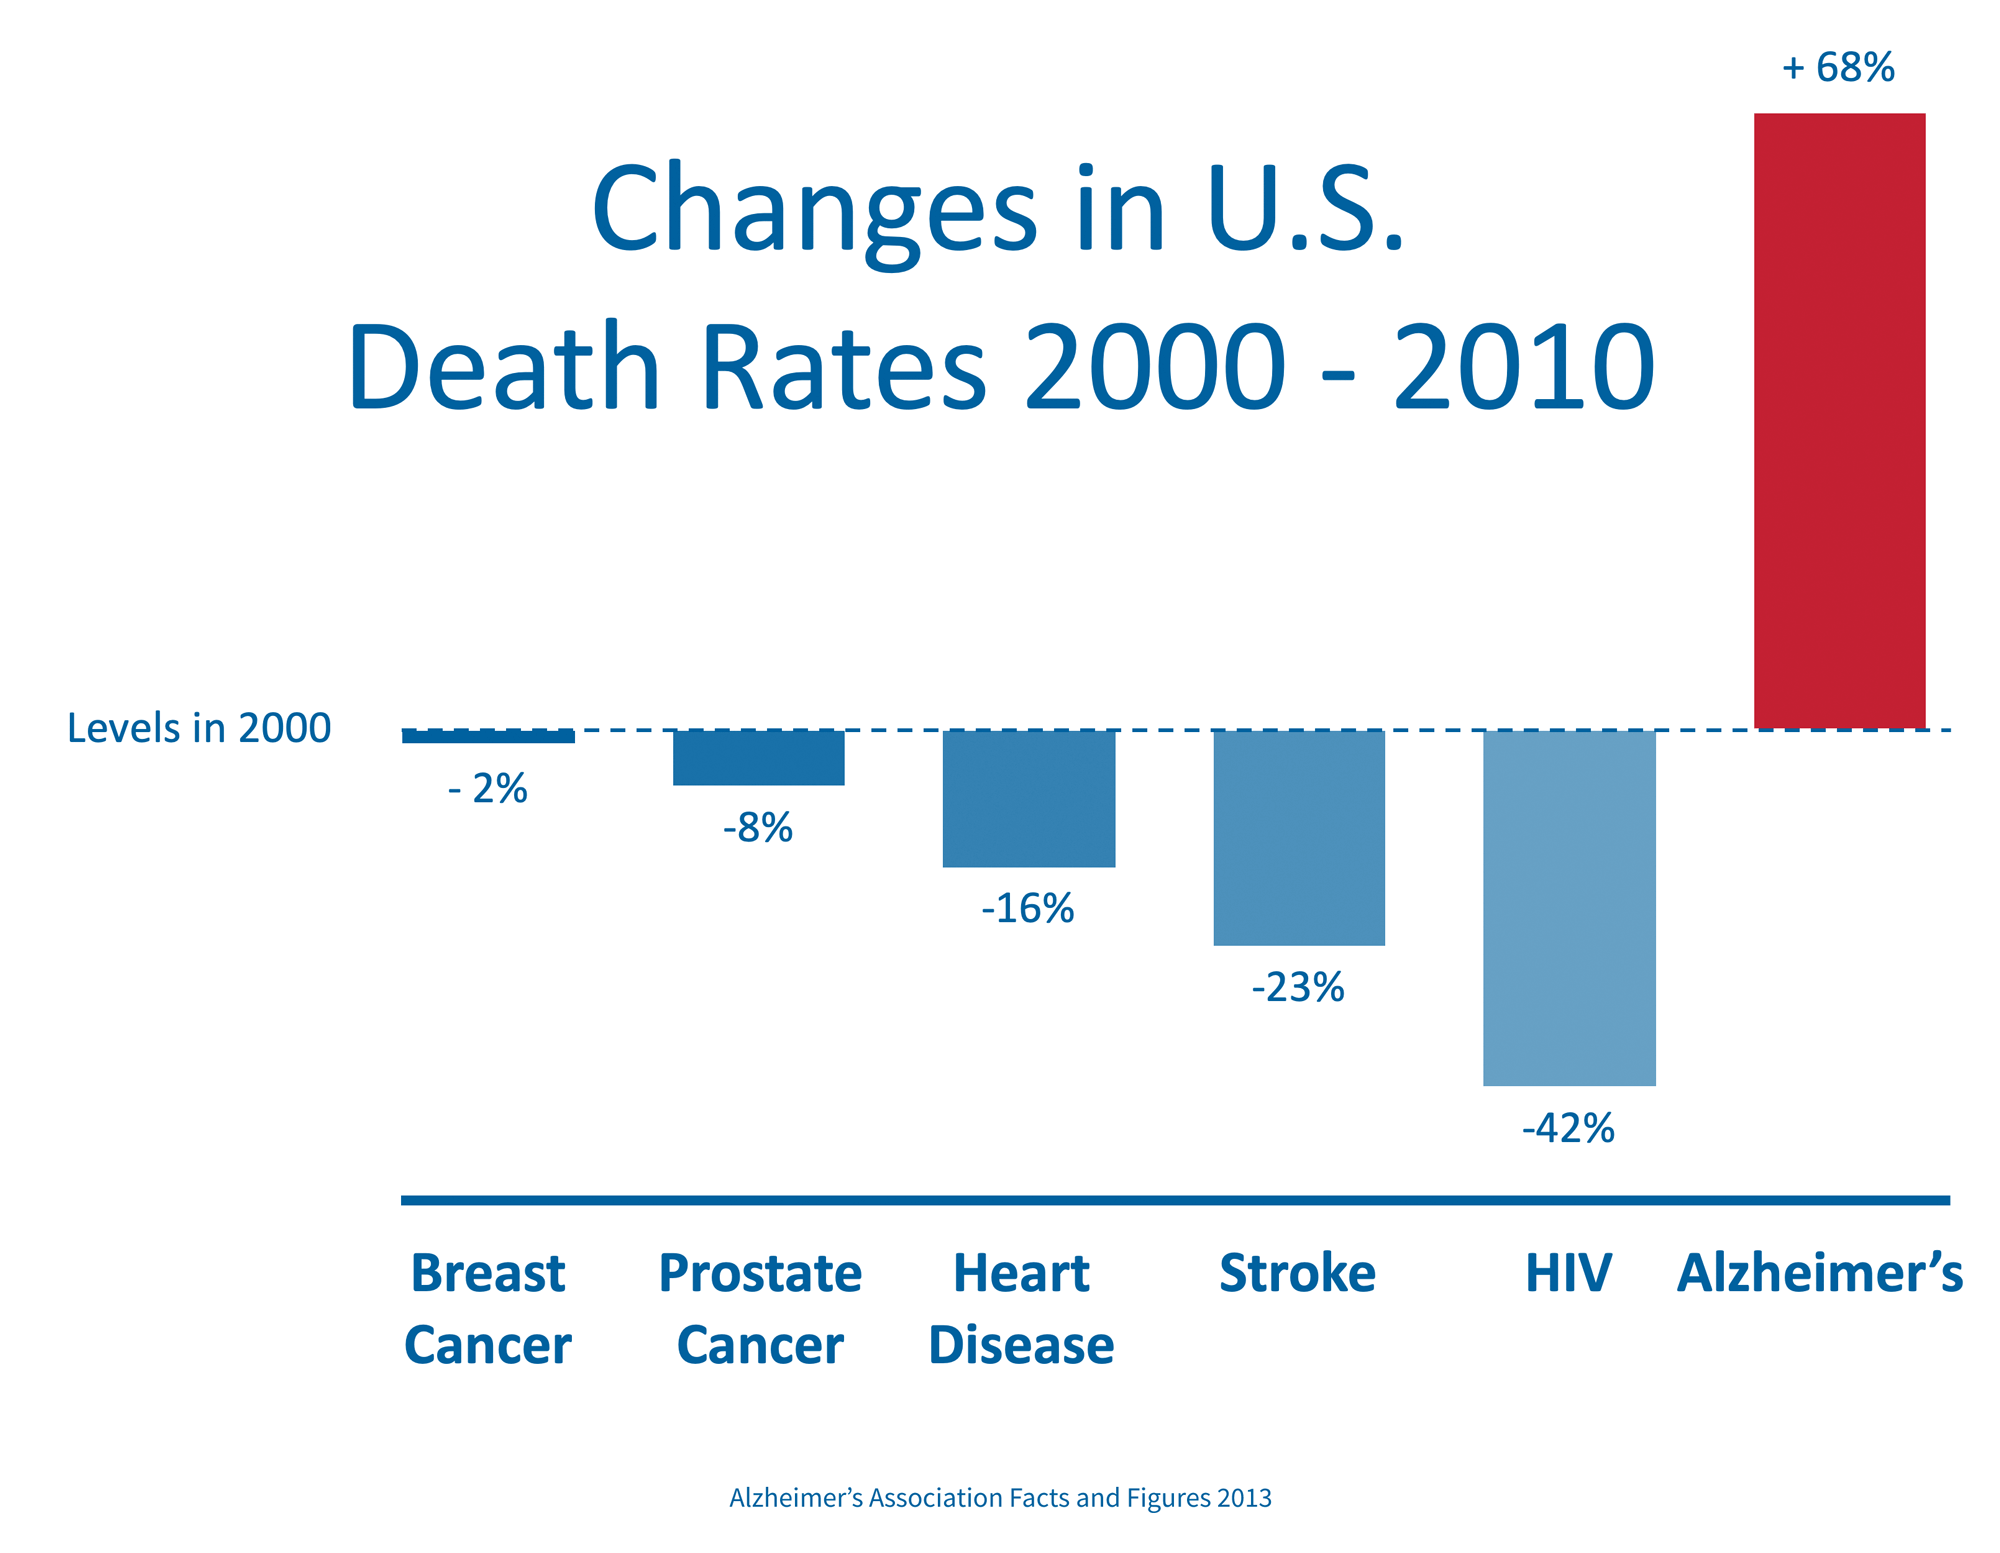 Changes in U.S. Death Rates 2000 - 2010